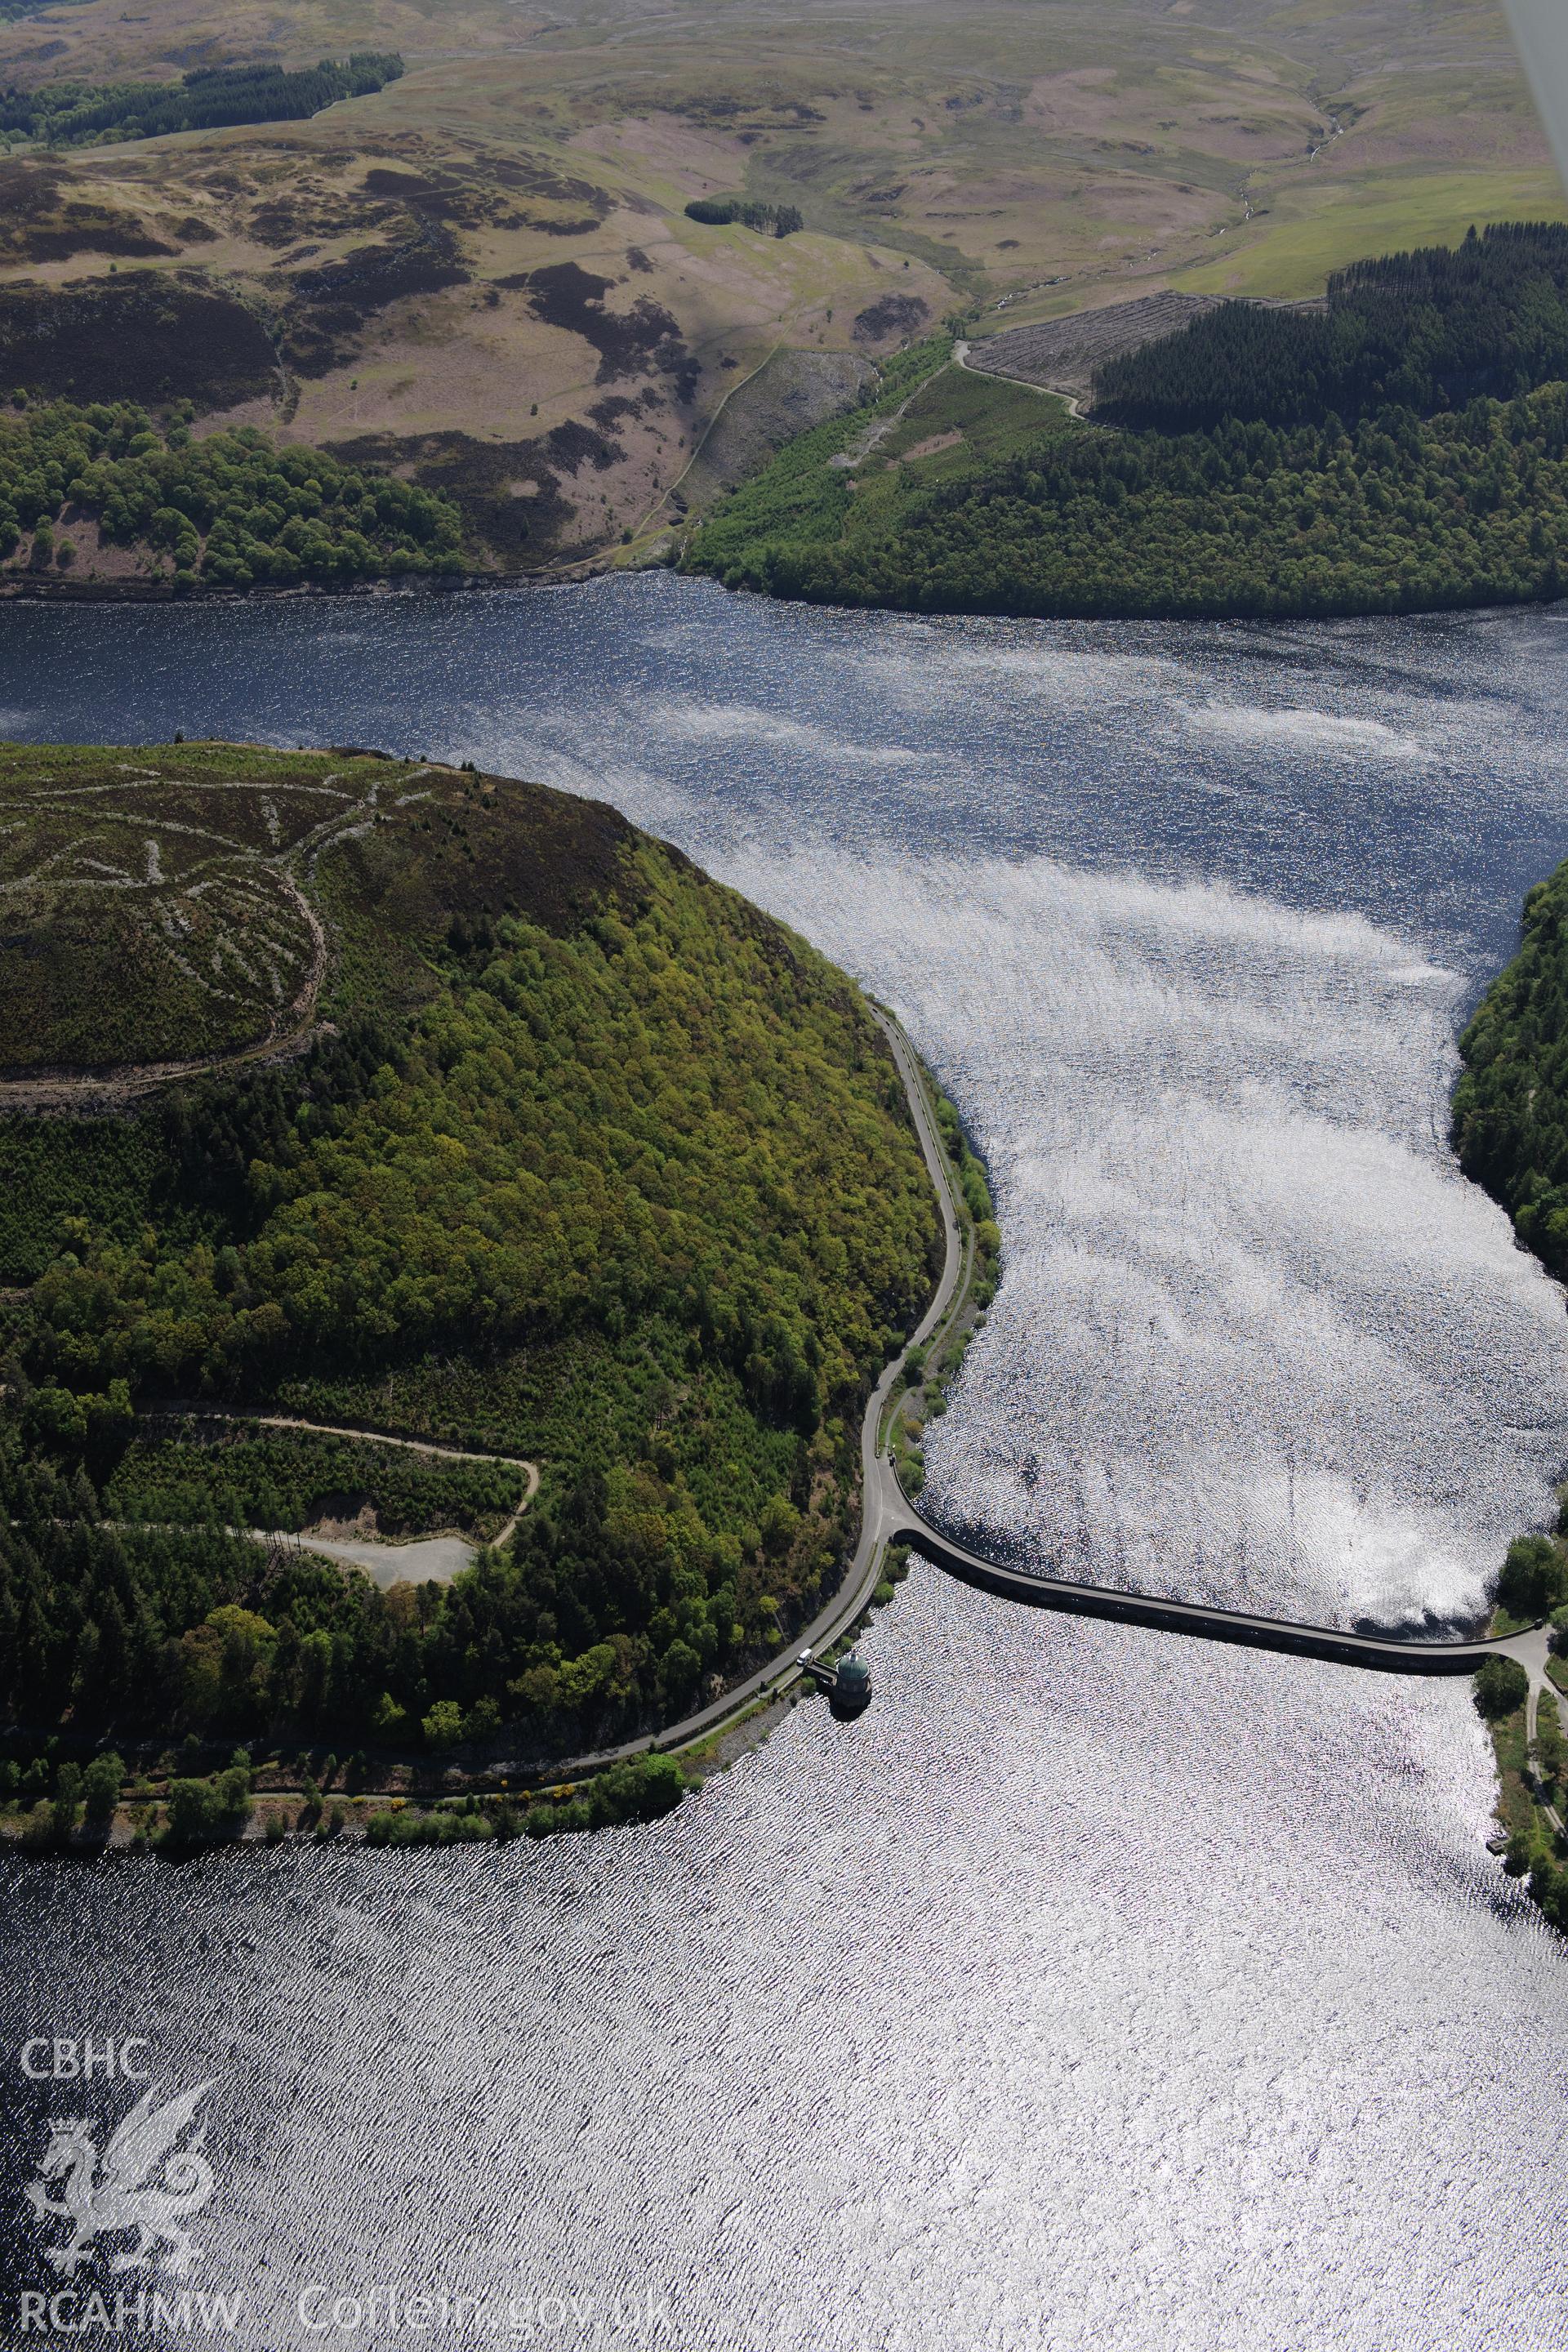 Garreg-Ddu dam and reservoir, and Coed-y-Foel pill boxes at the Elan Valley water scheme. Oblique aerial photograph taken during the Royal Commission's programme of archaeological aerial reconnaissance by Toby Driver on 3rd June 2015.